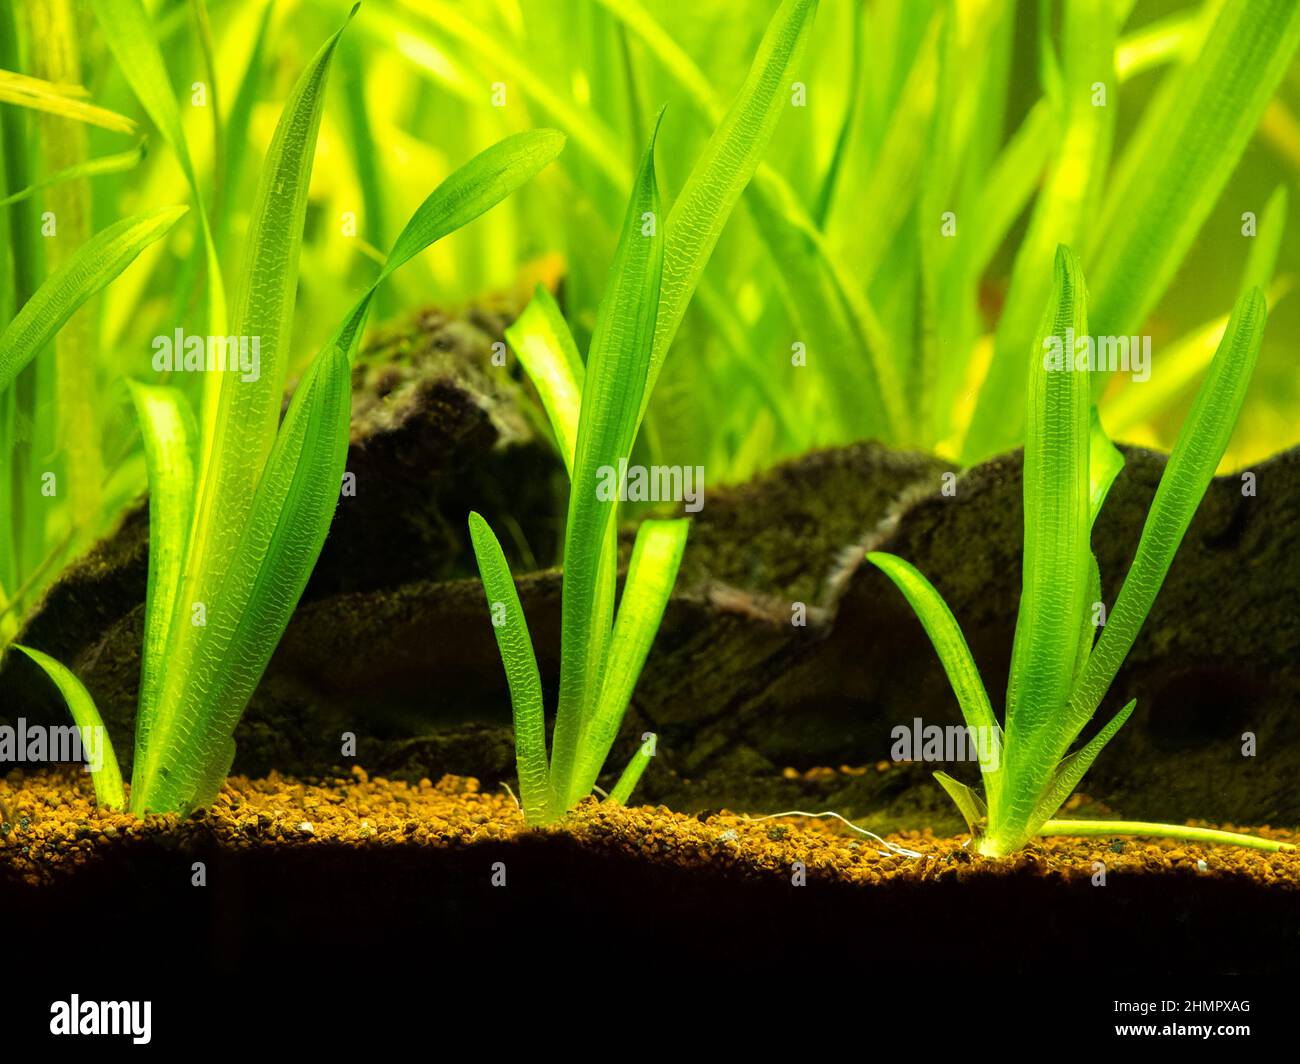 Vallisneria gigantea freshwater aquatic plants in a fish tank with blurred background Stock Photo